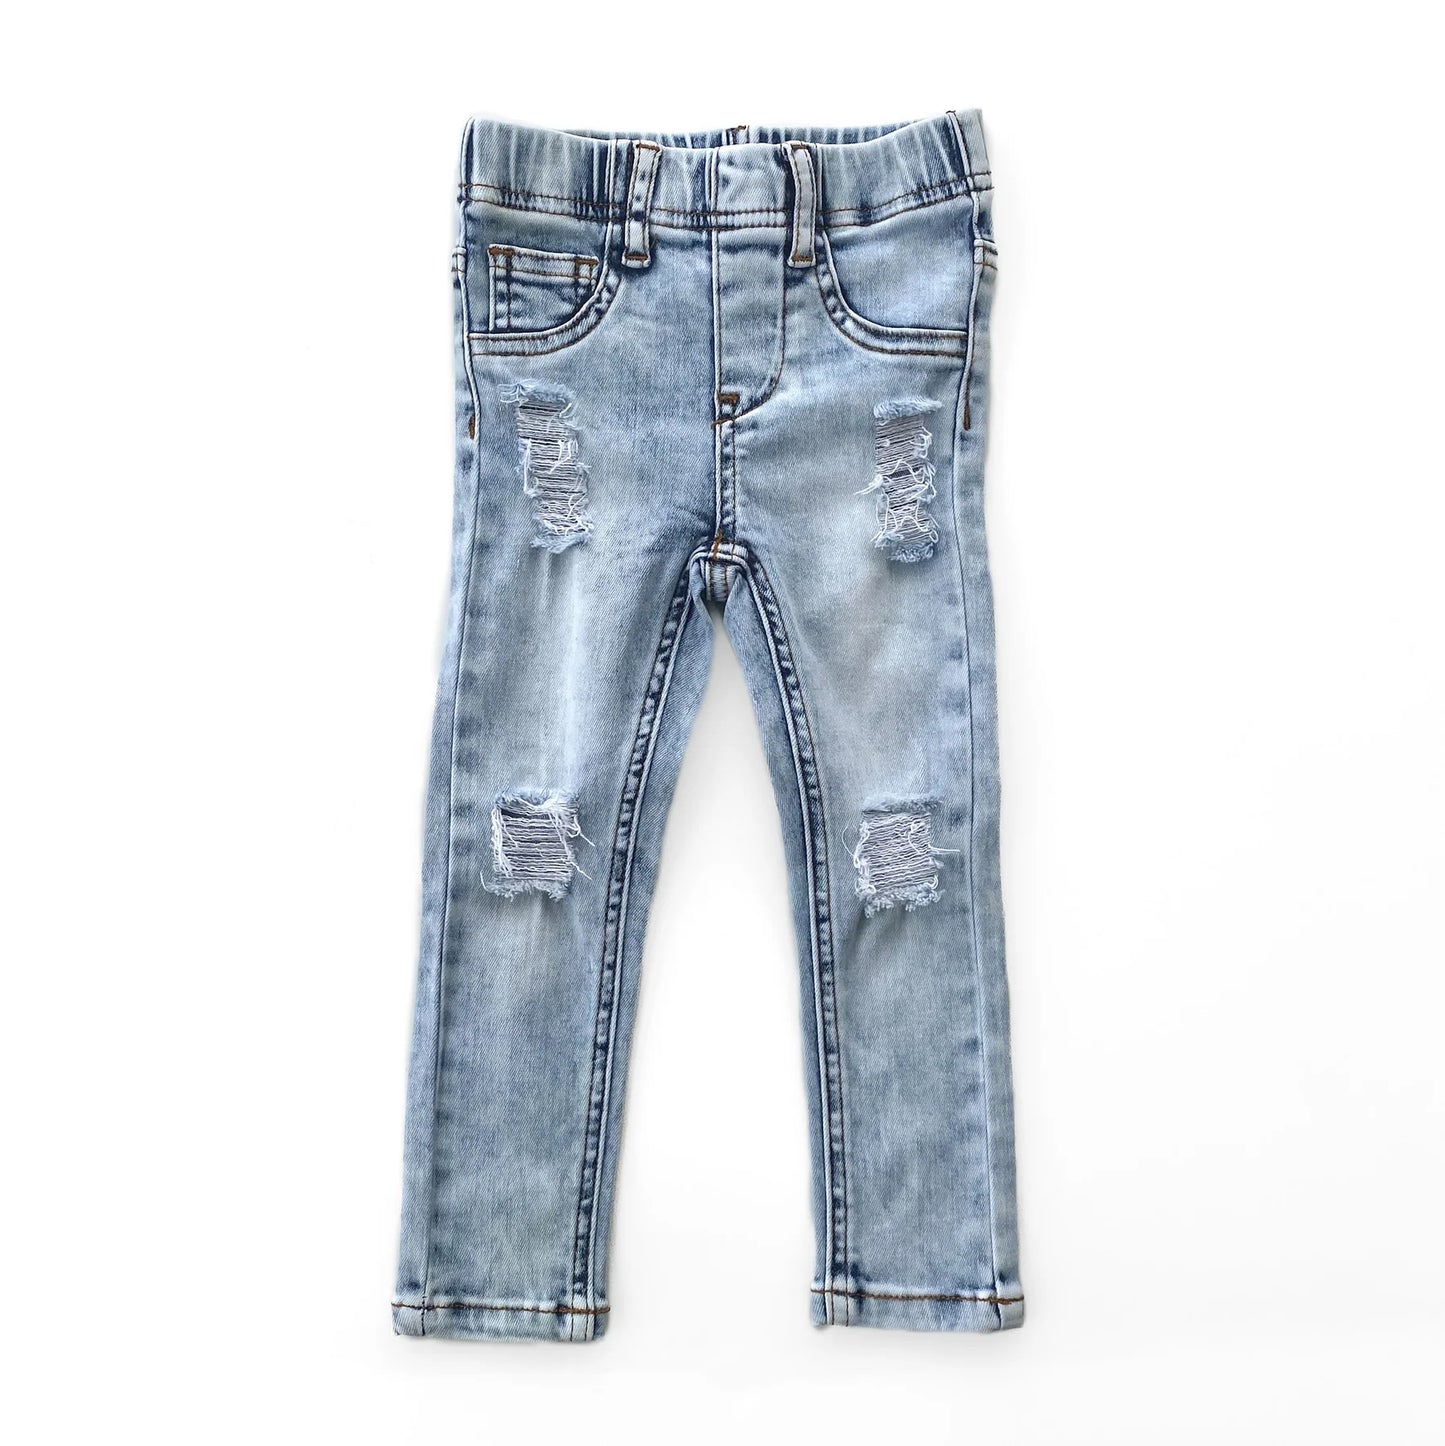 Distressed Jeans - Light Wash